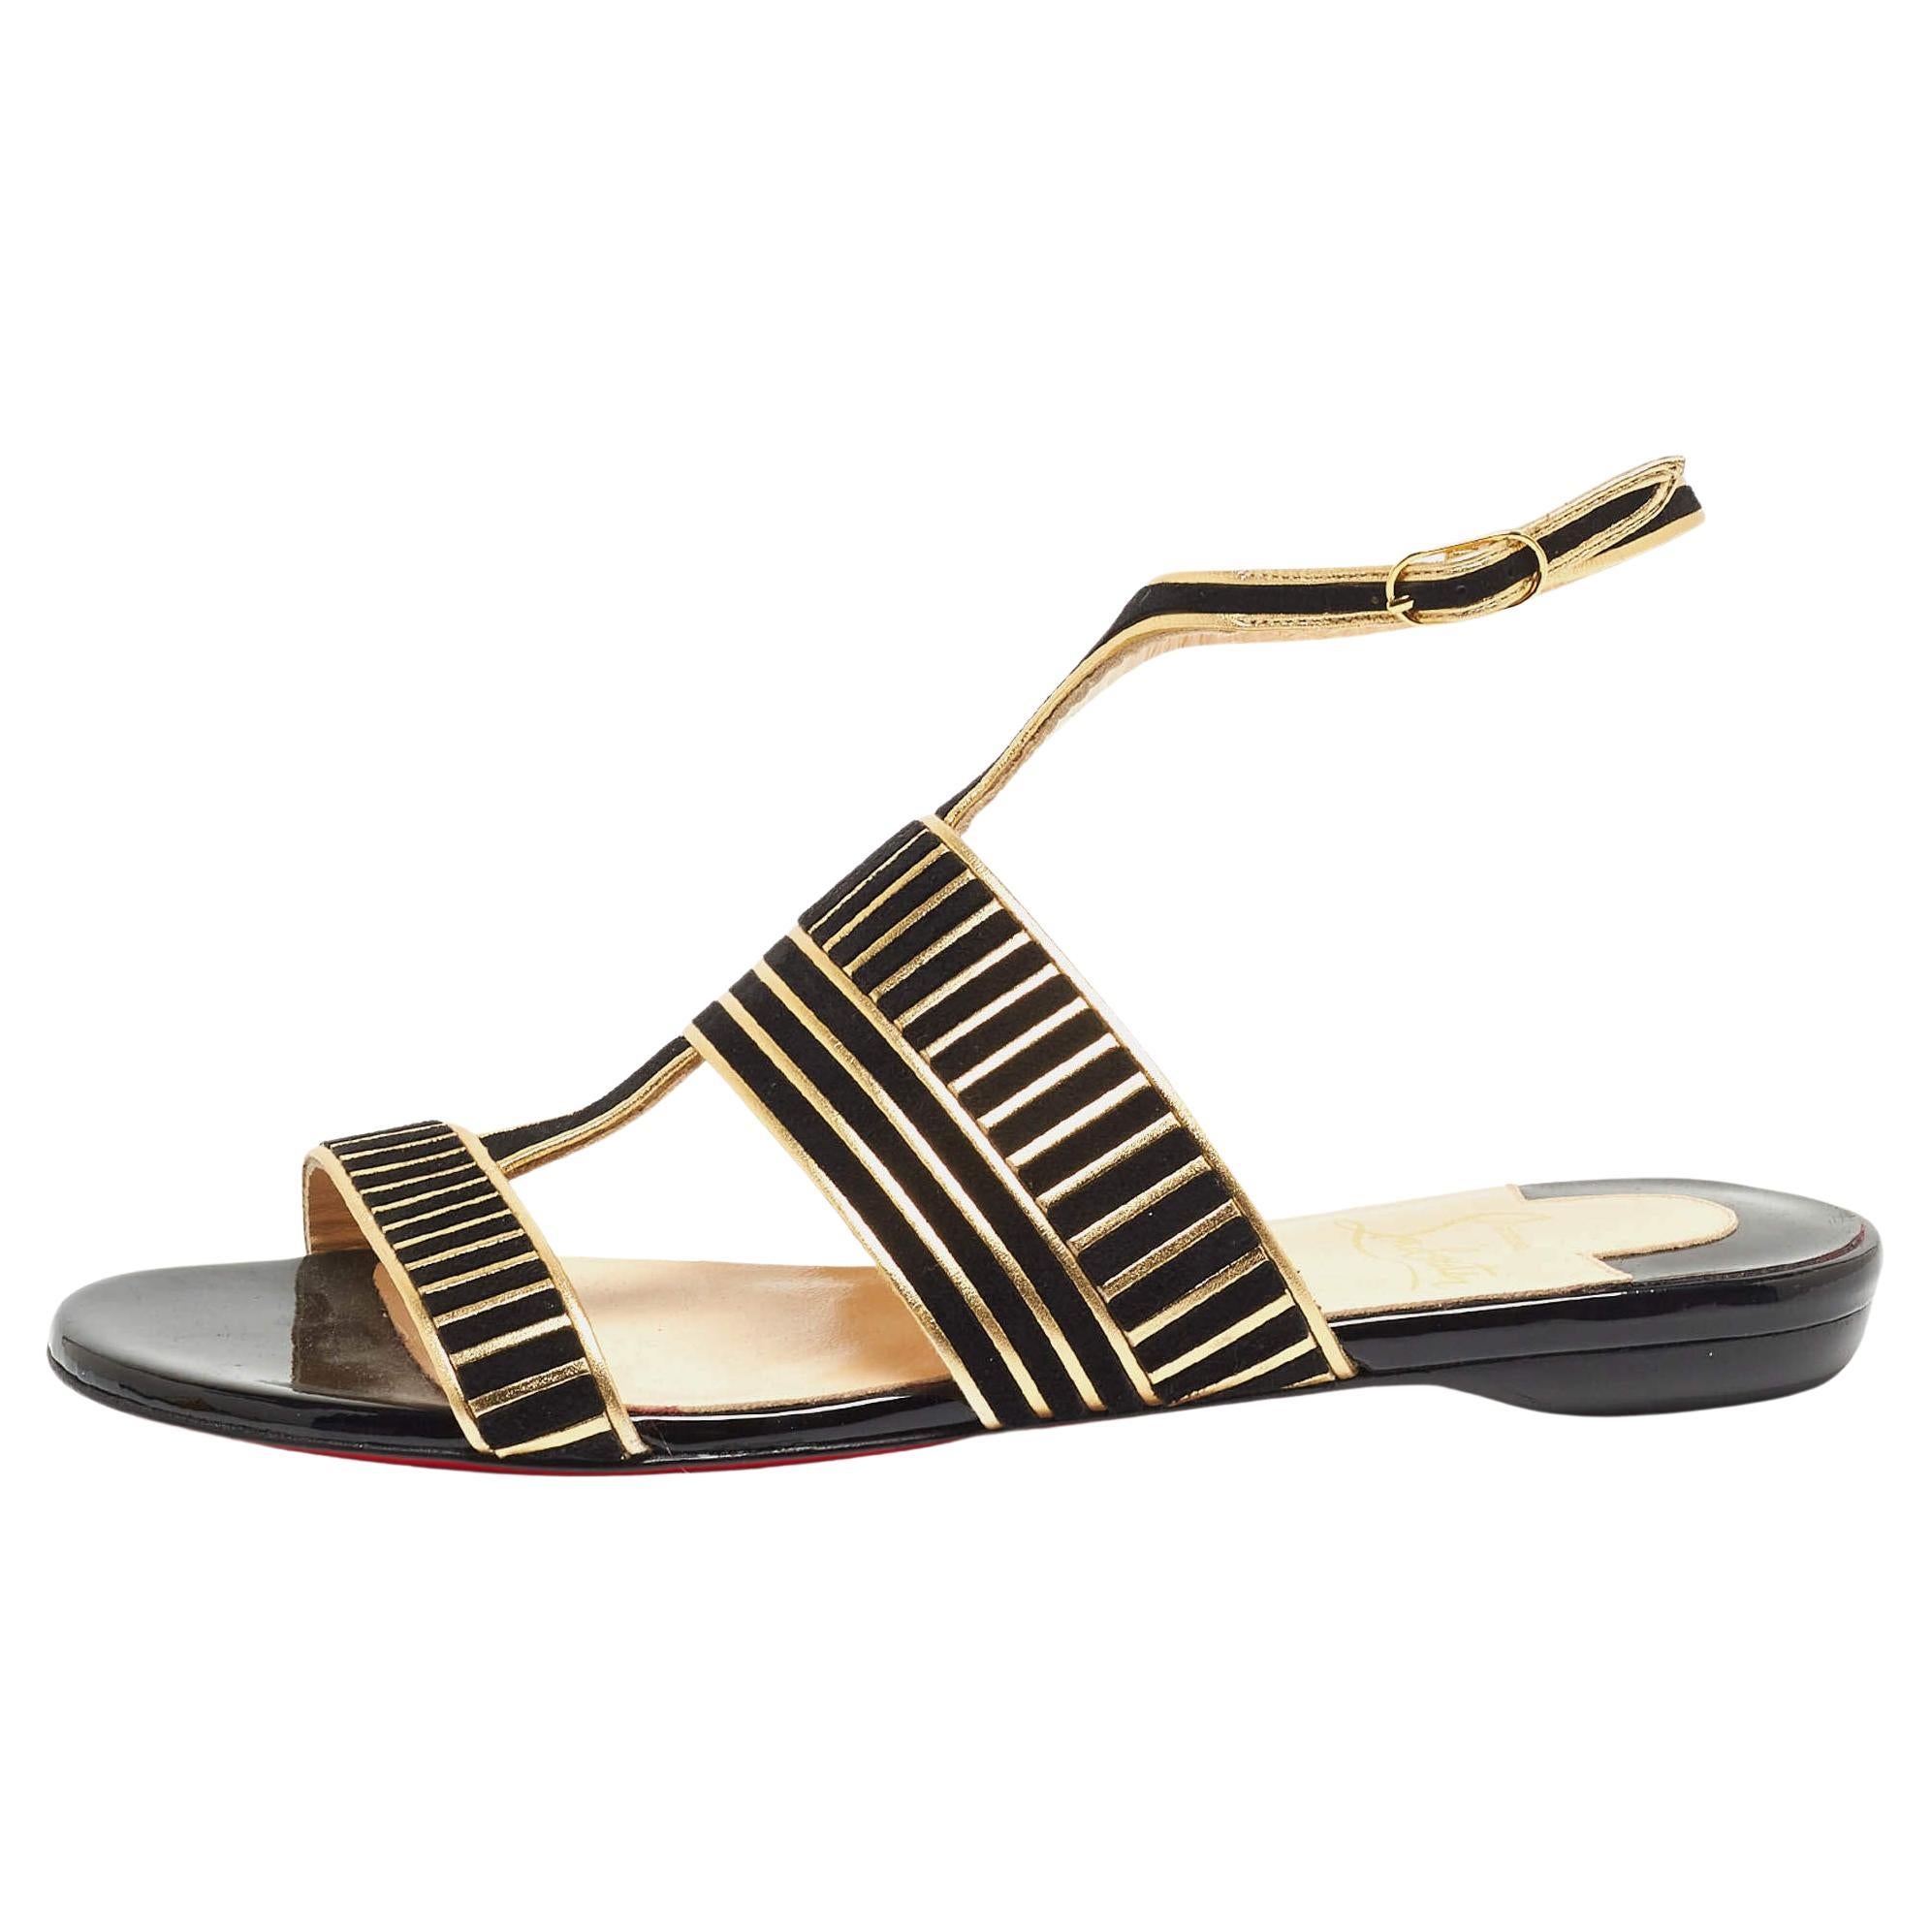 Christian Louboutin Black Suede and Leather Striped Flat Sandals Size 36